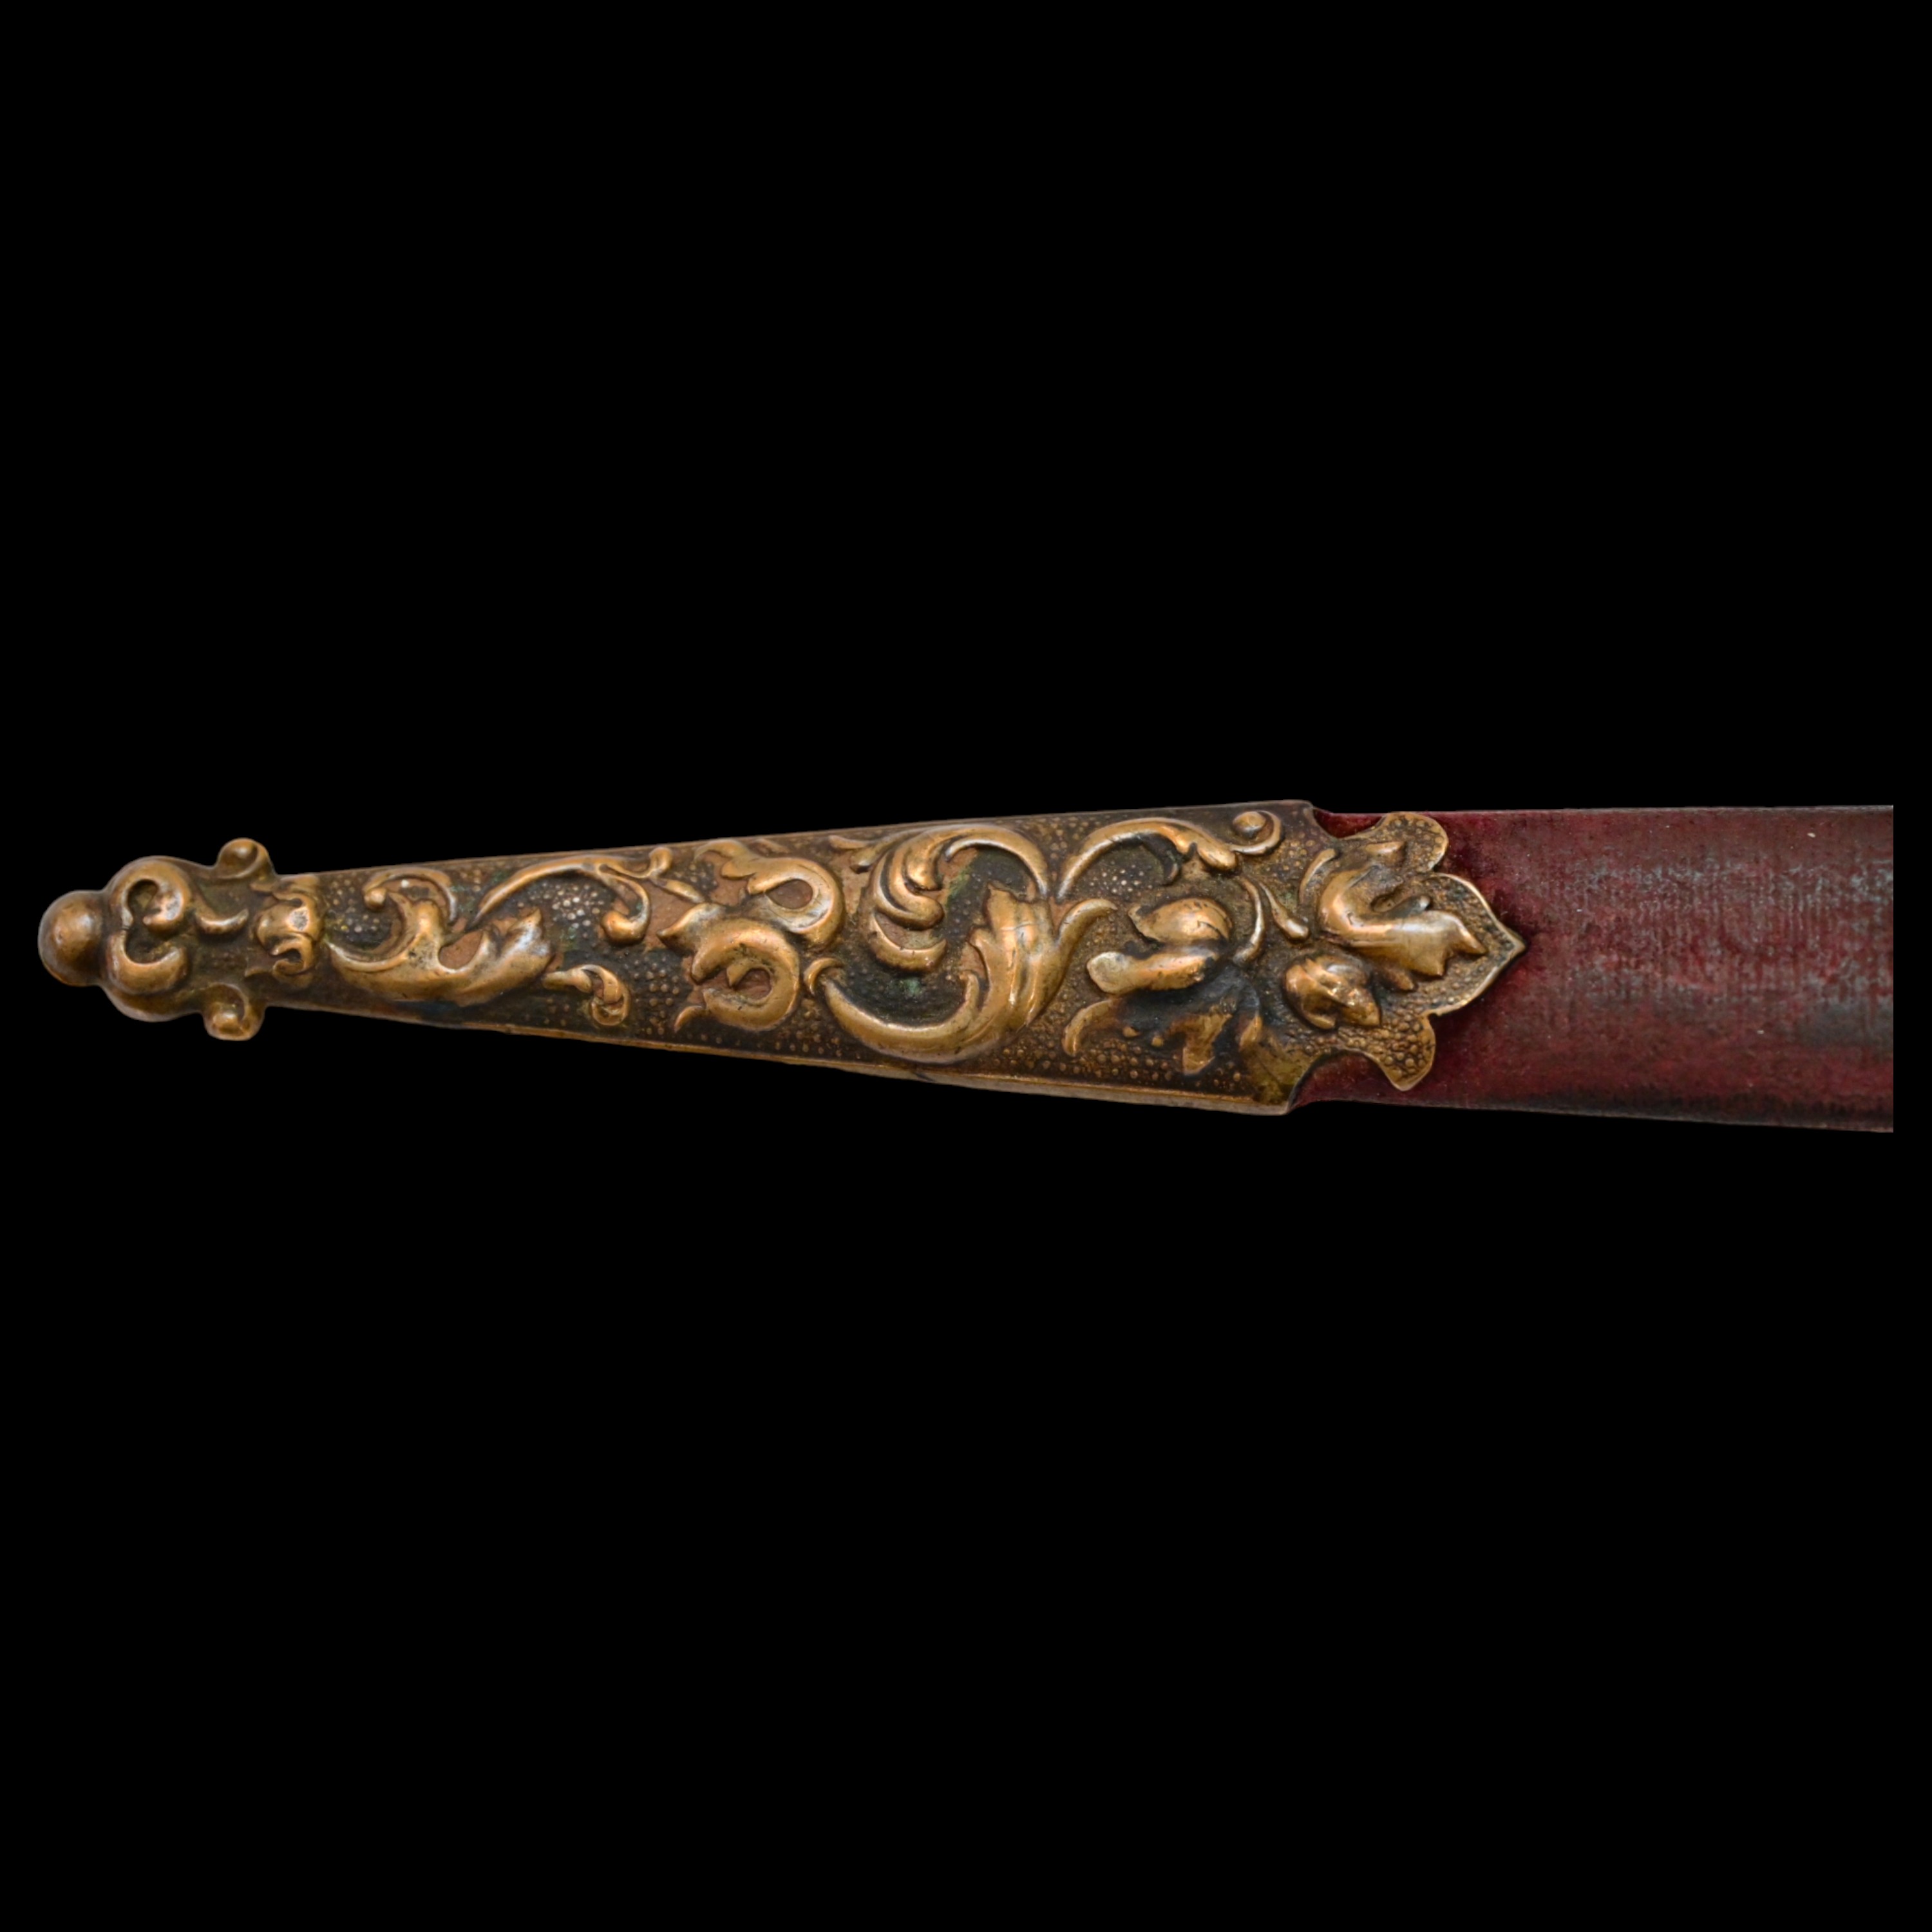 A Very high quality Dagger Renaissance Style Brass with inlaid colored stones, 19th century. - Image 5 of 9